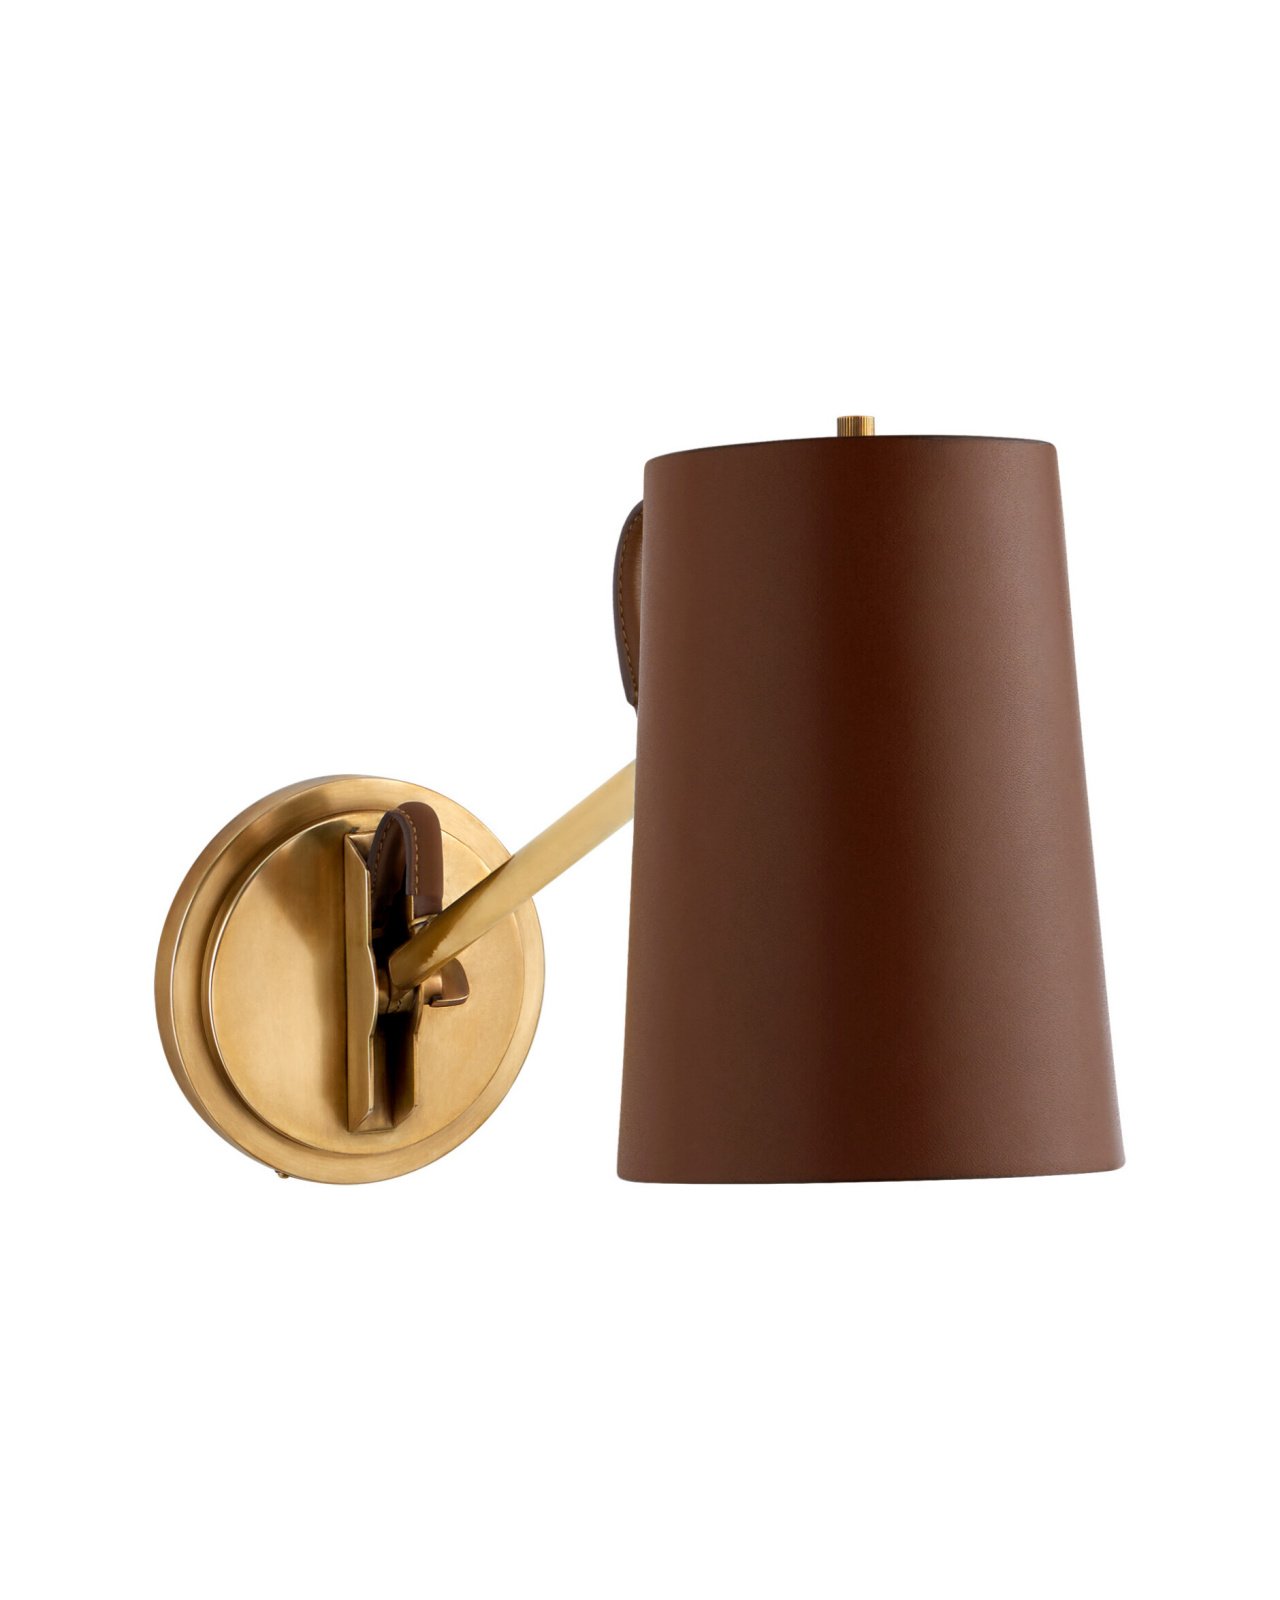 Benton Single Library Sconce Natural Brass/Saddle Leather